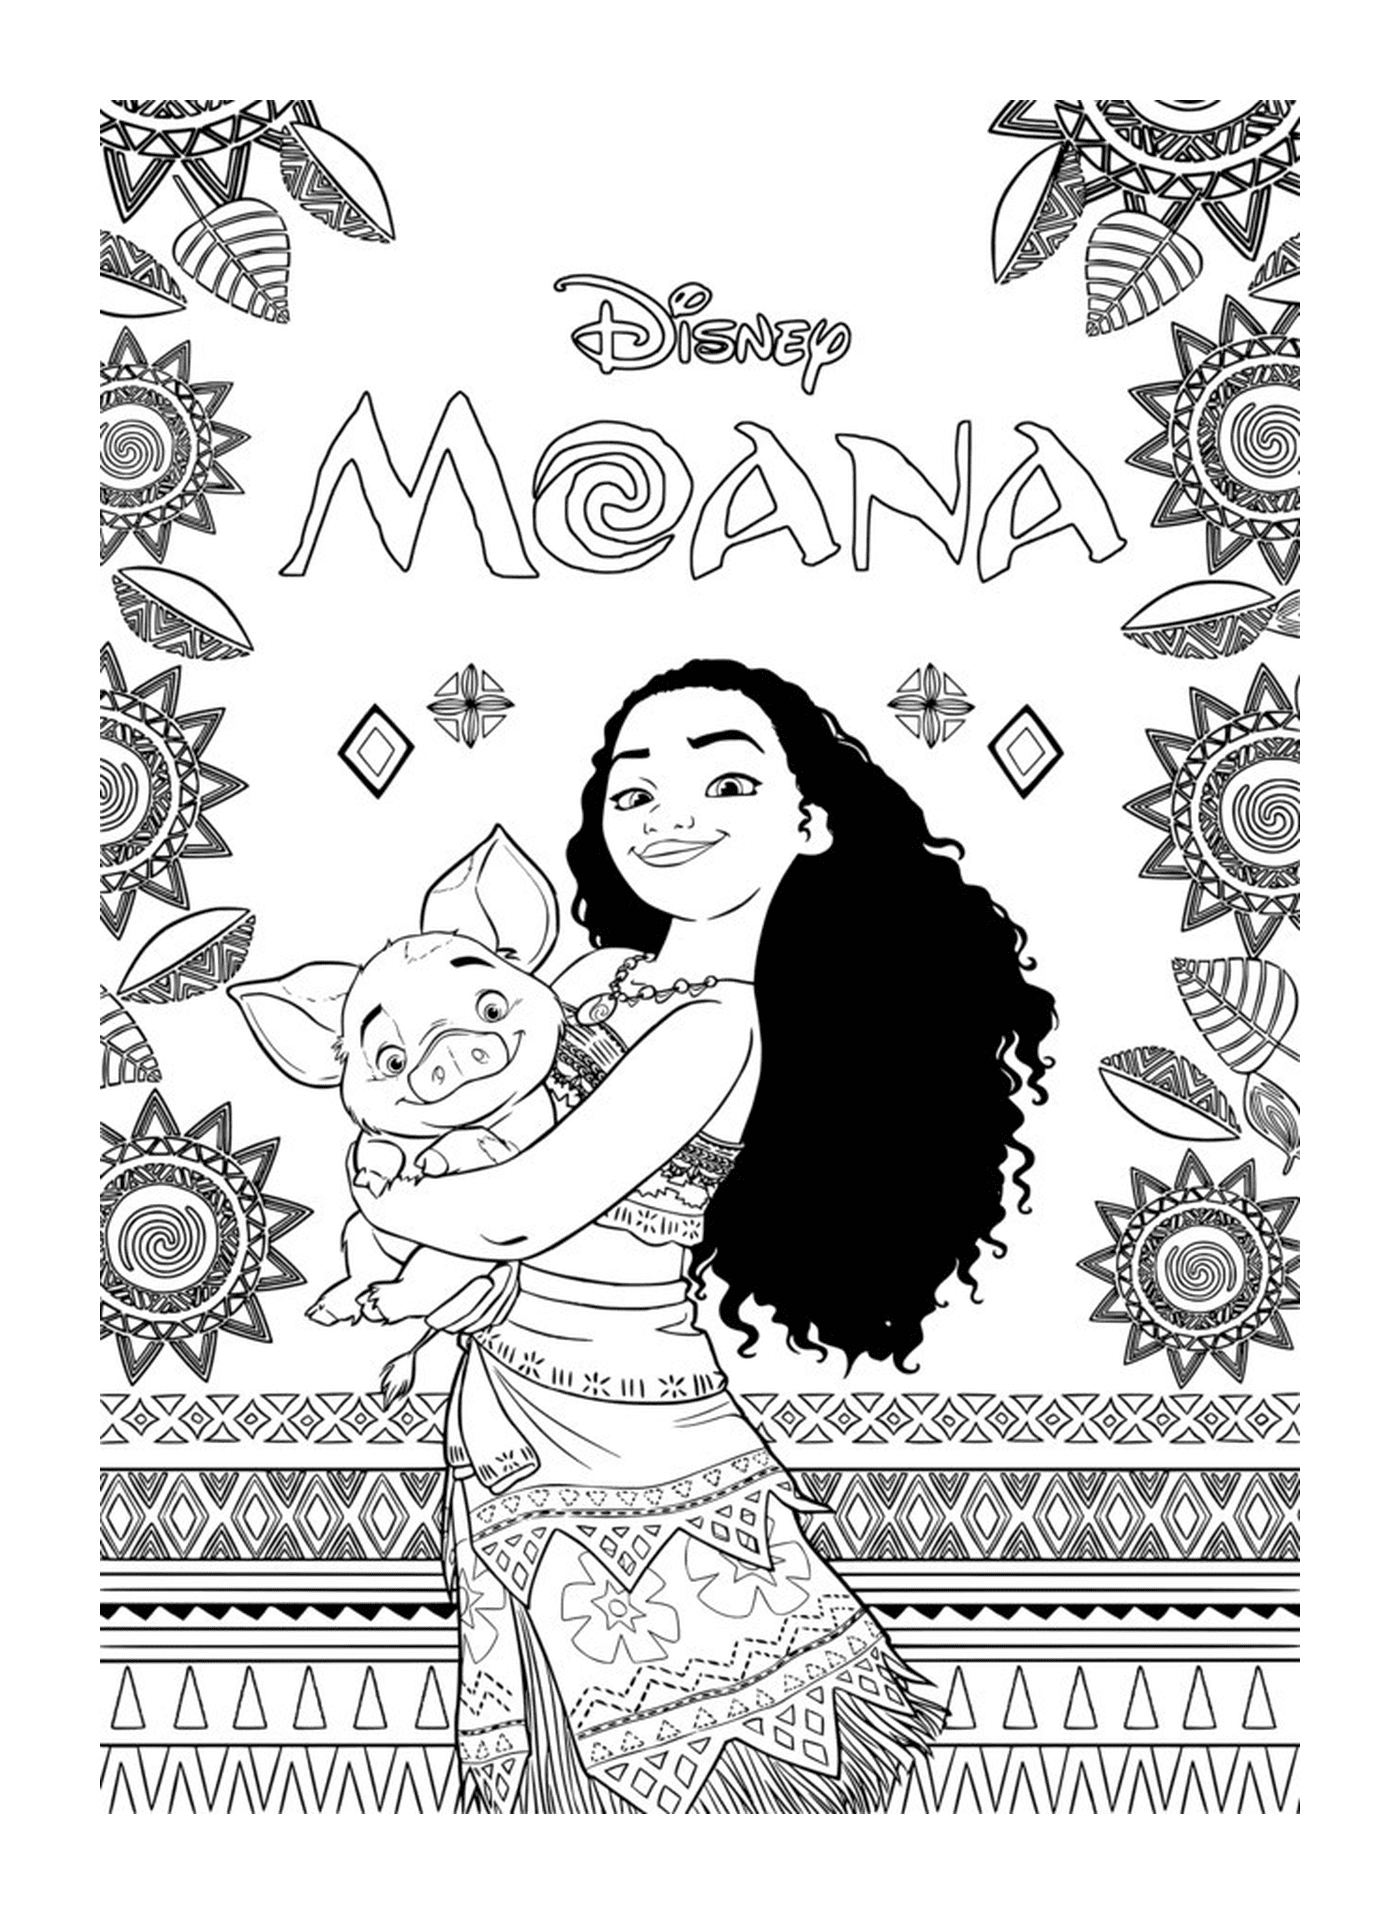  Moana, wife and piglet 